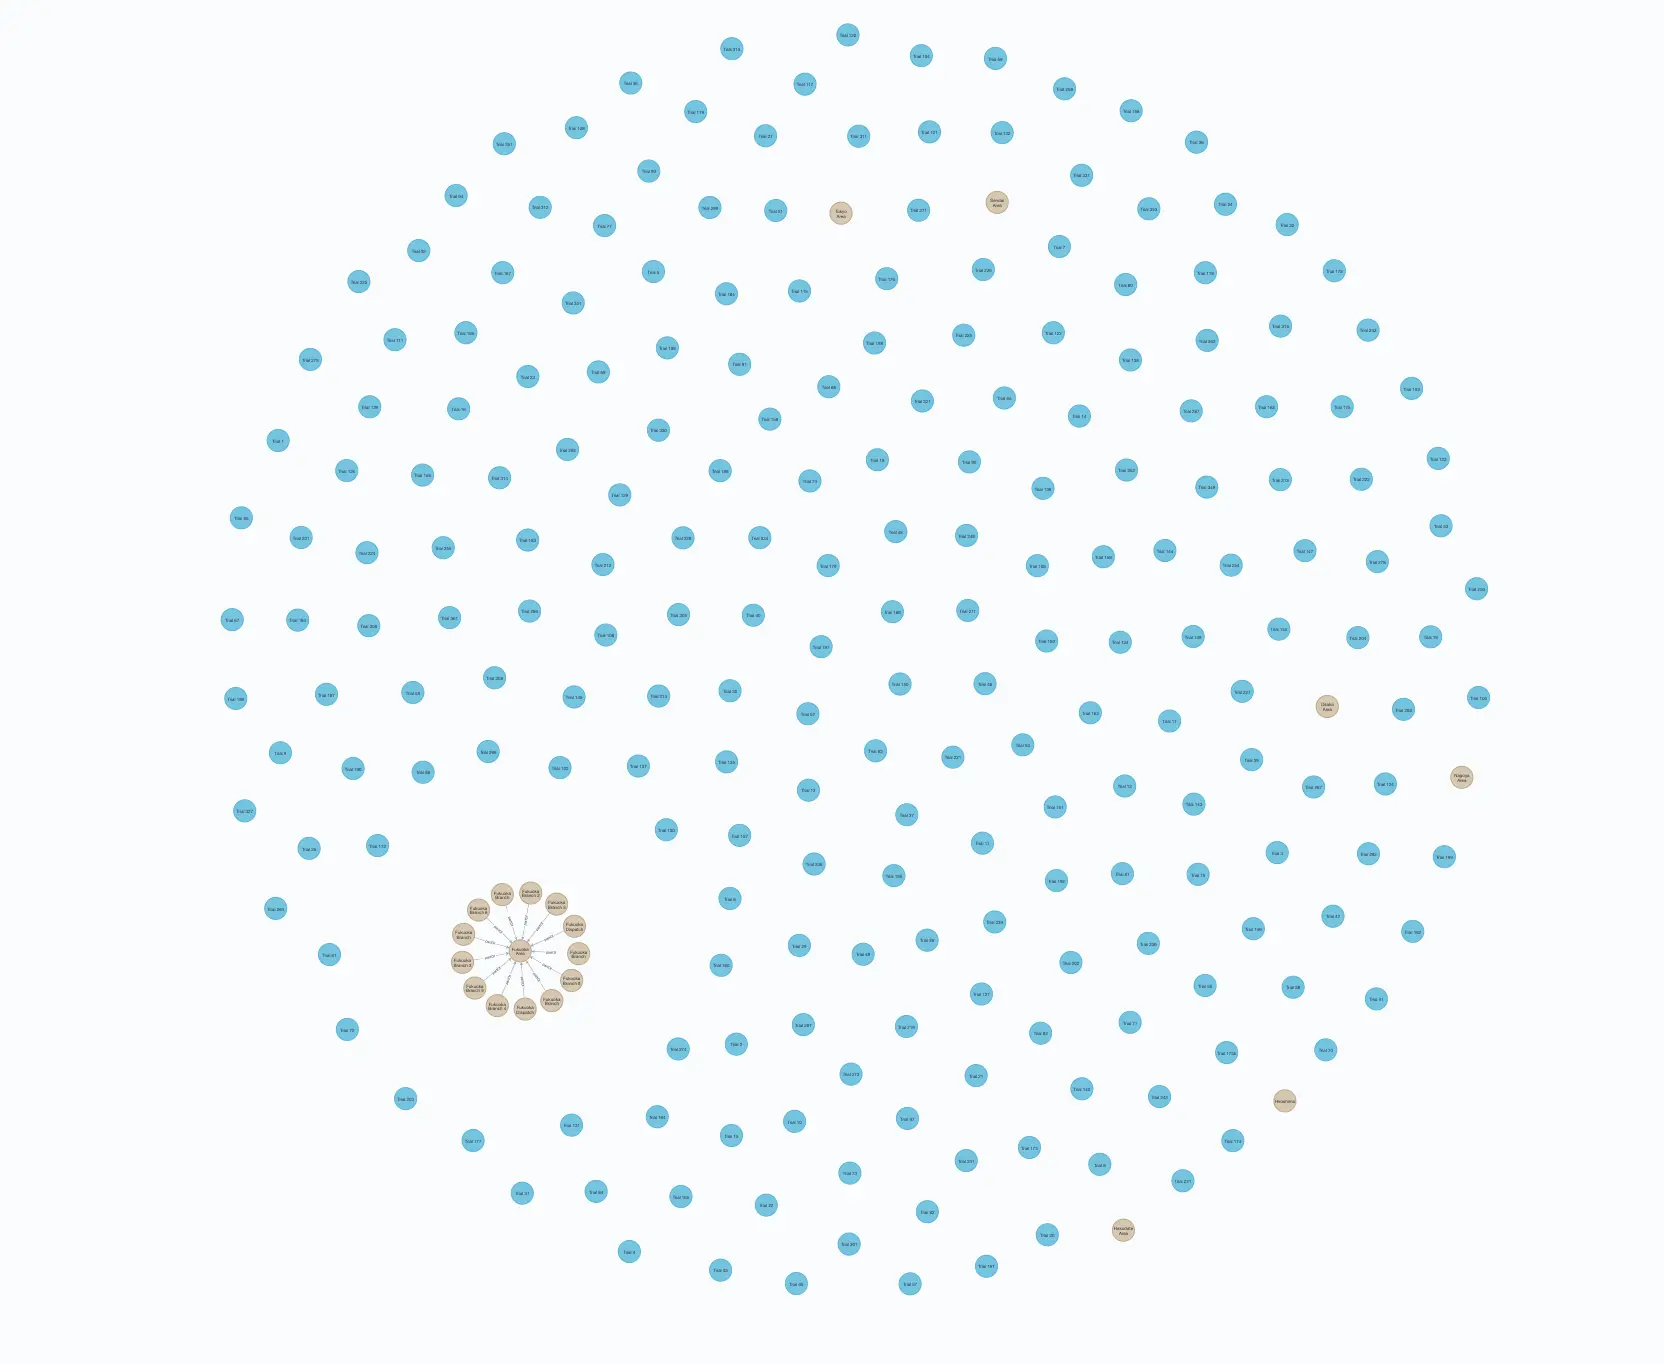 Connected nodes within a group of disconnected nodes